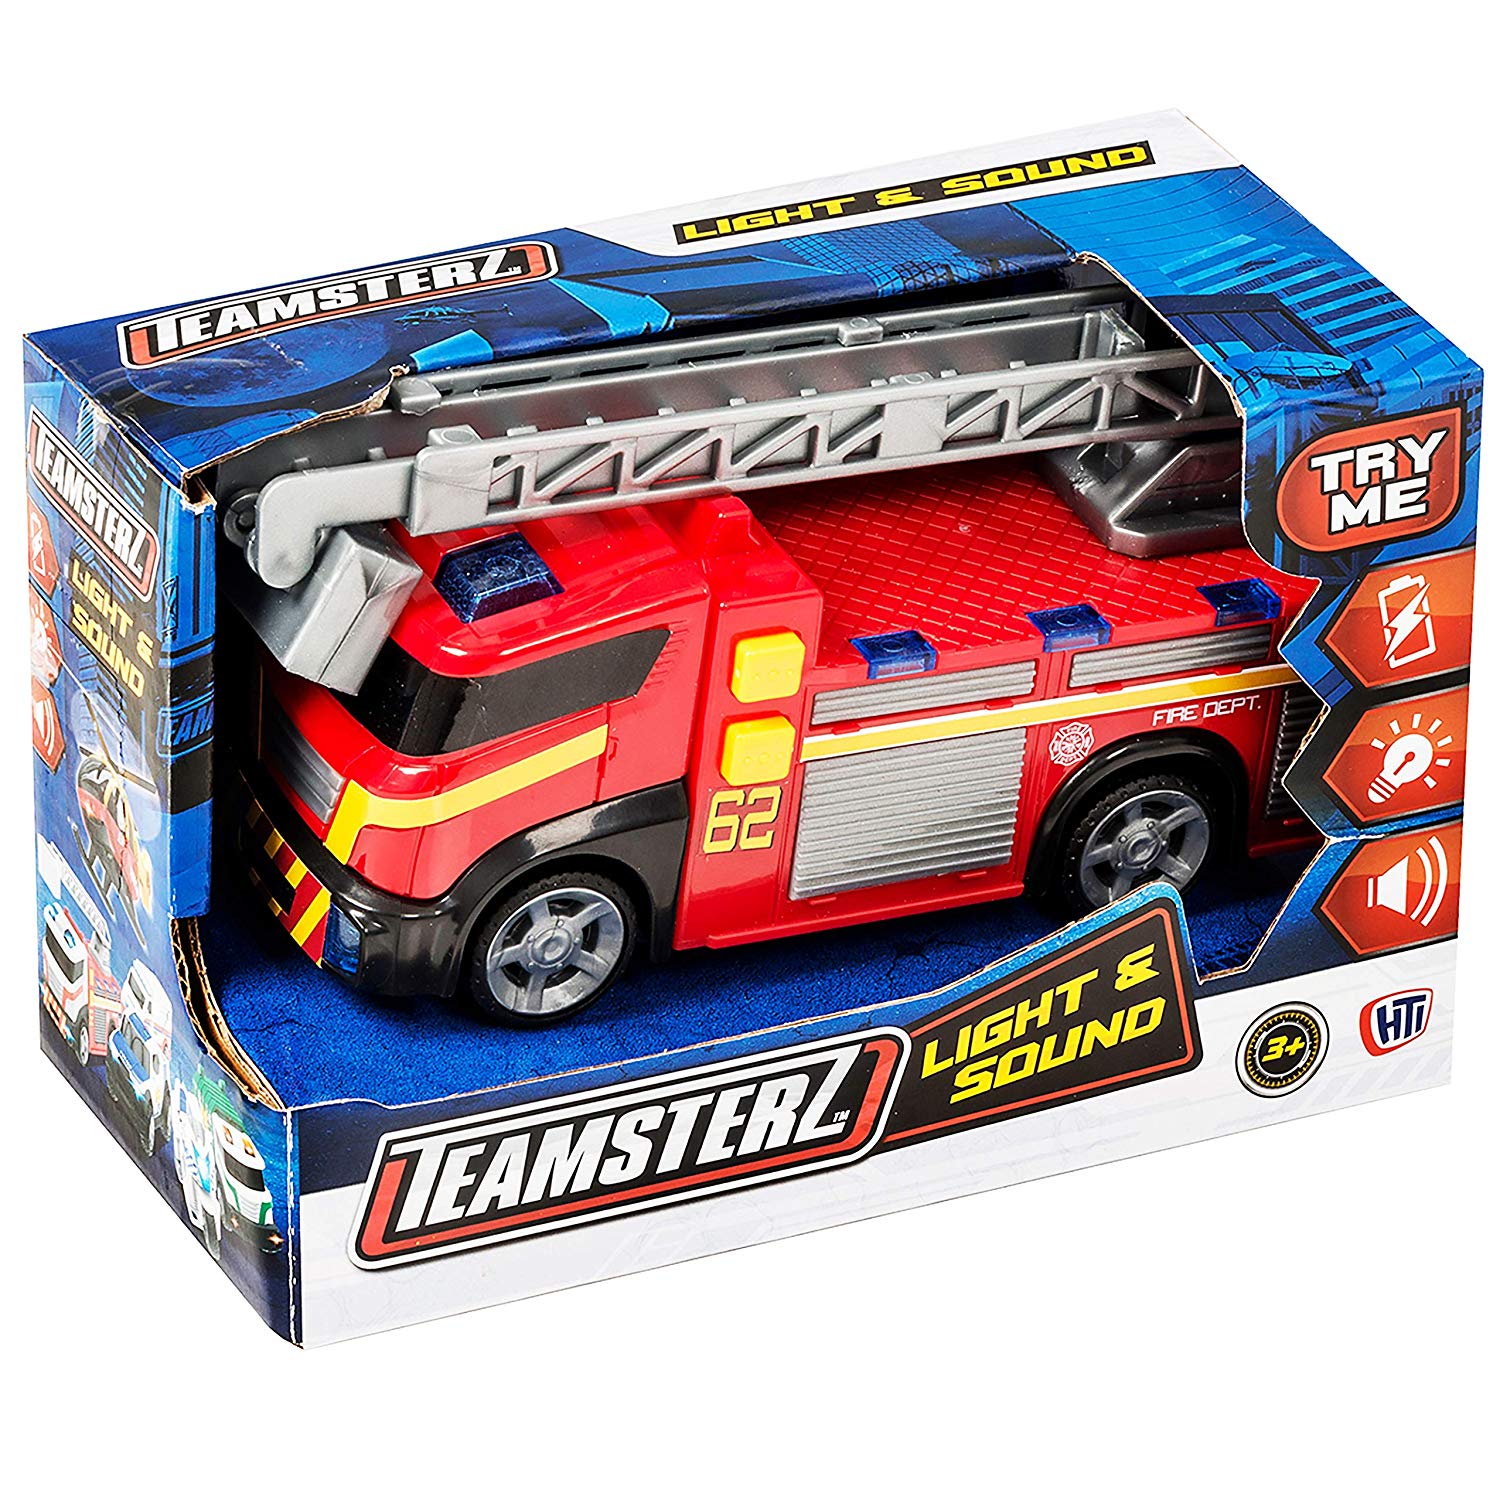 HTI Teamsterz Small Light & Sound Fire Engine